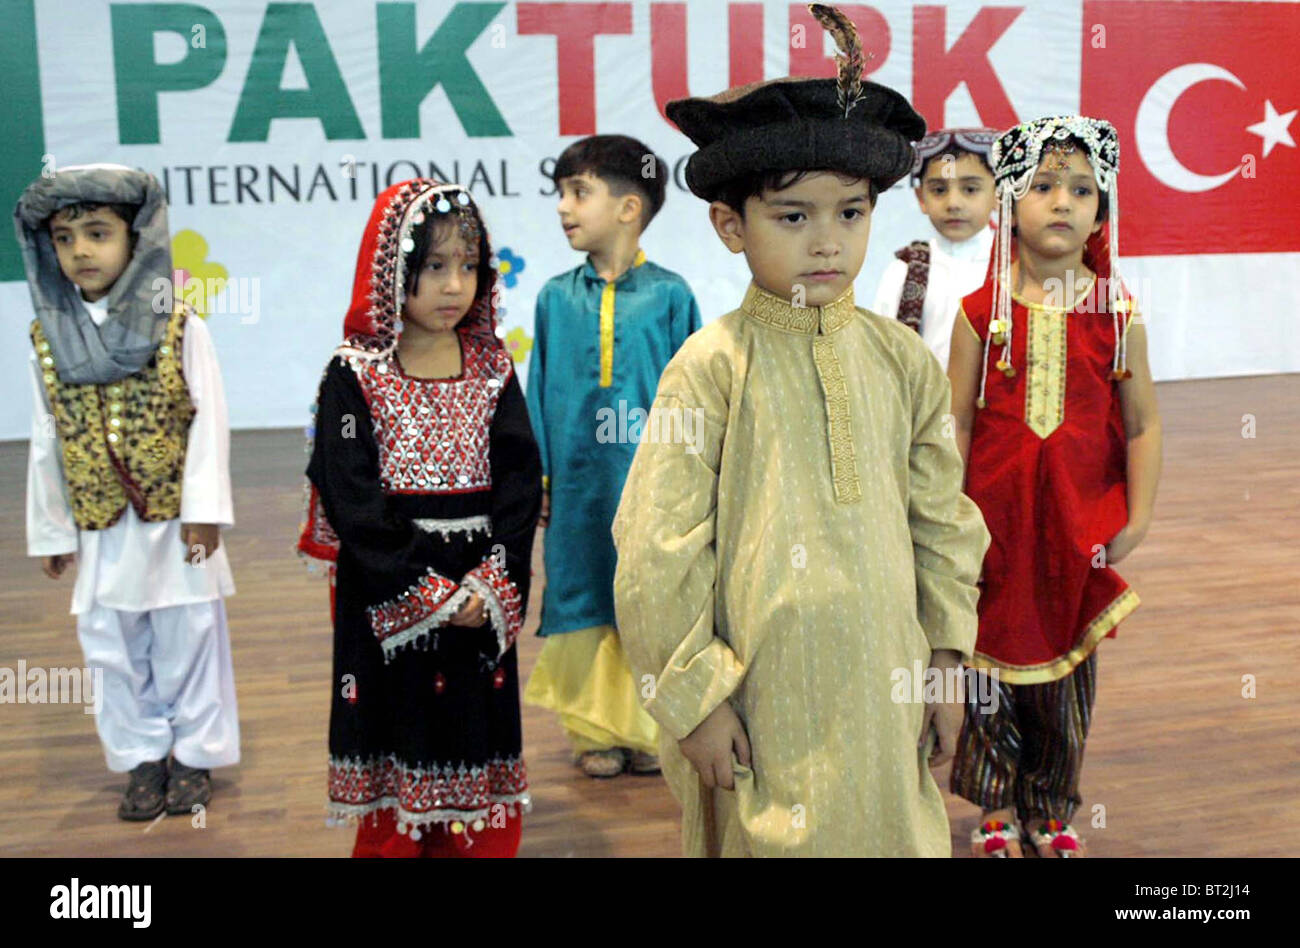 Students perform tableau on stage during Annual ceremony of Pak Turk ...